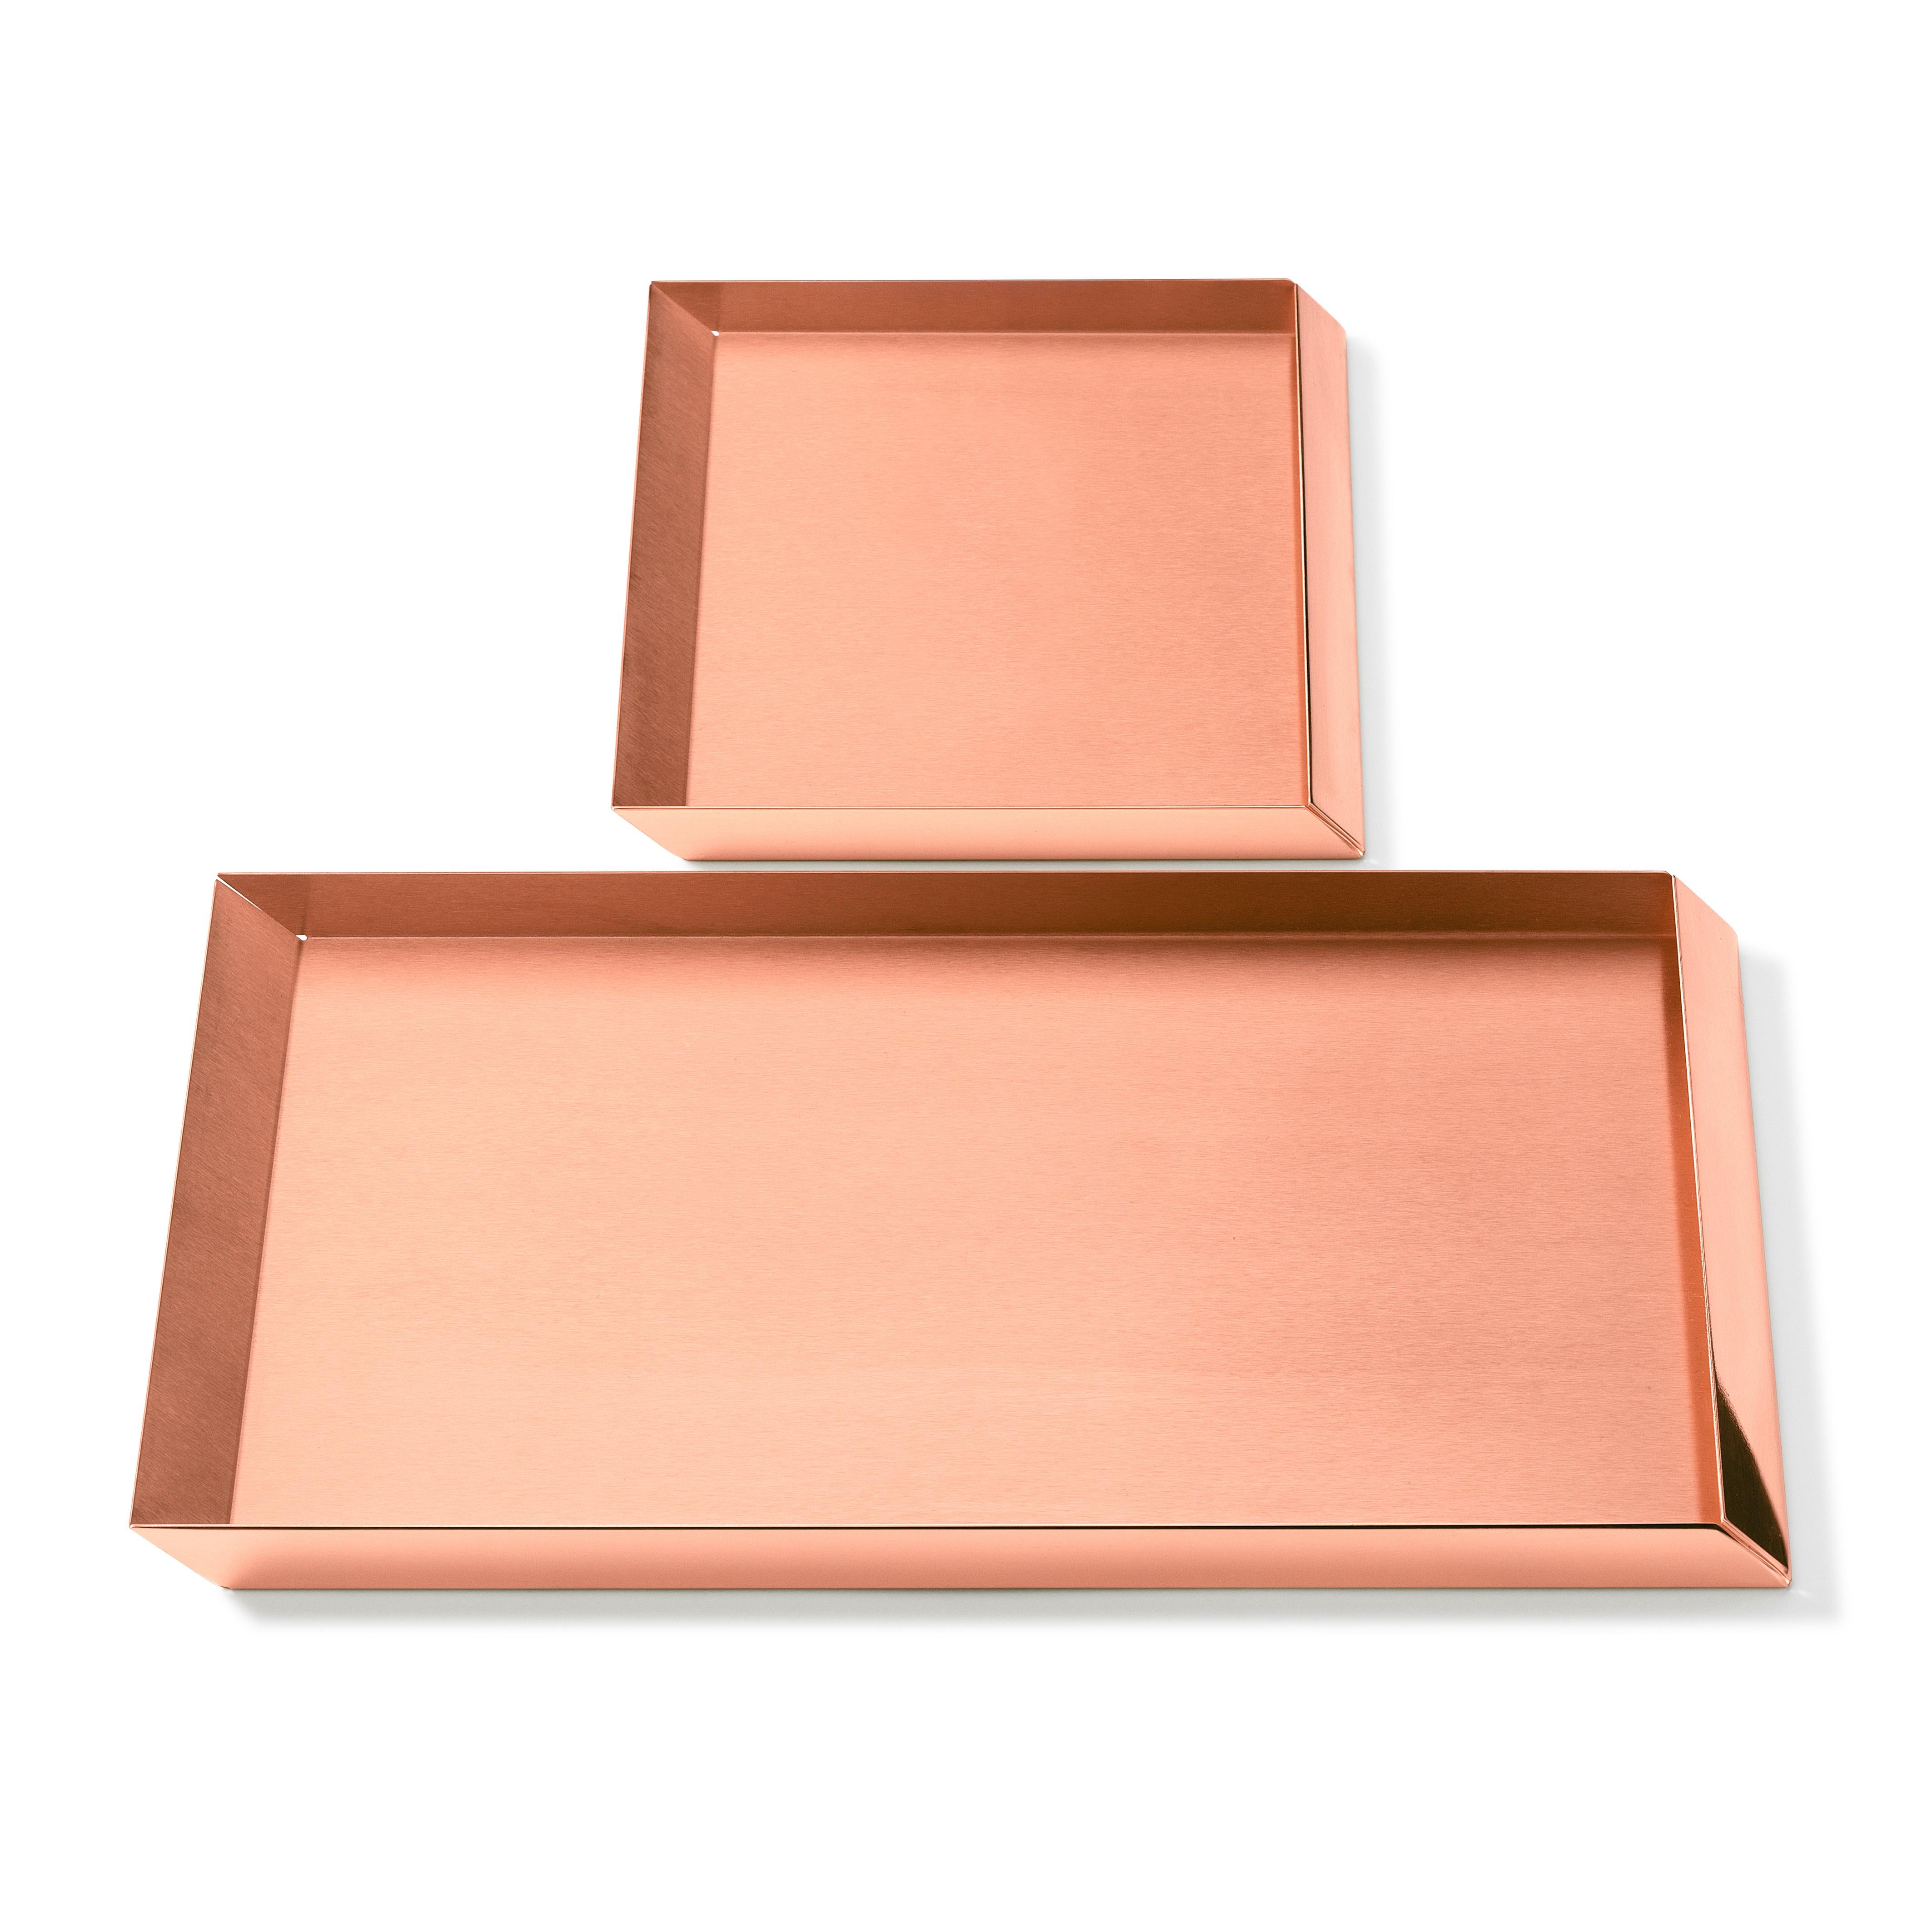 Axonometry rectangular small tray in copper by Elisa Giovanni.

Materials:
Copper
Net weight:
0.4 kg
Dimensions:
W 18 x D 12 x 2 H cm.